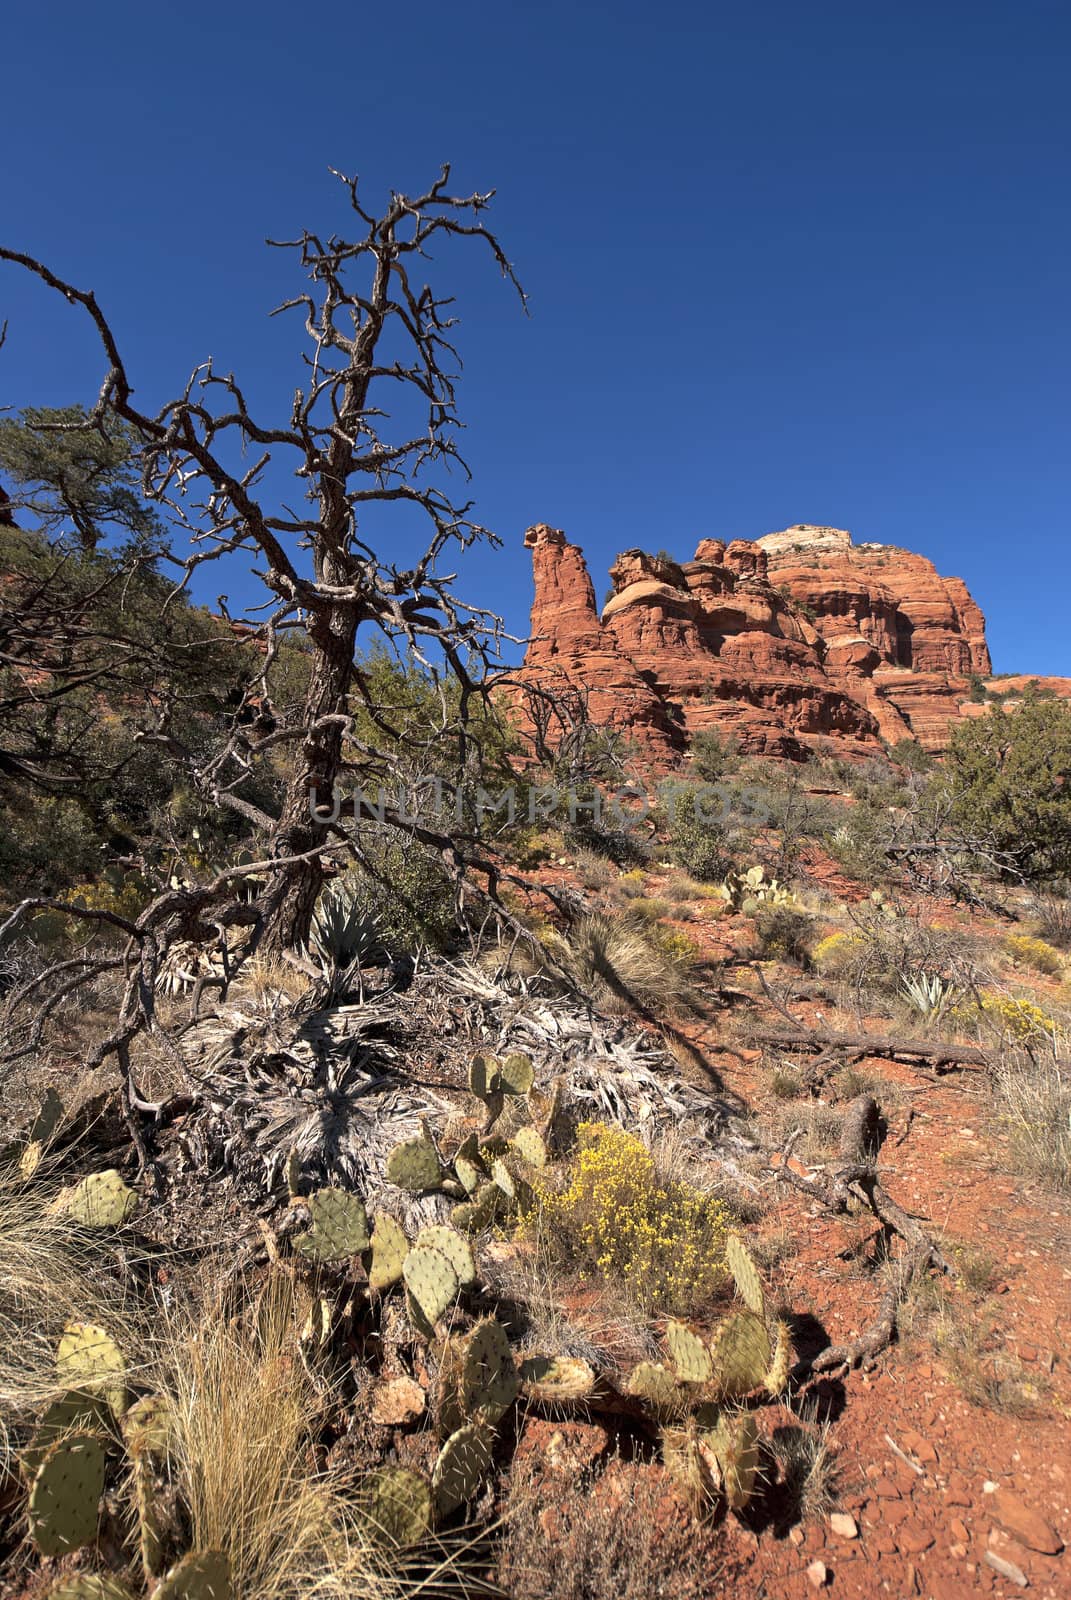 Life and dead in the desert on the Boynton Trail in Sedona. by Claudine